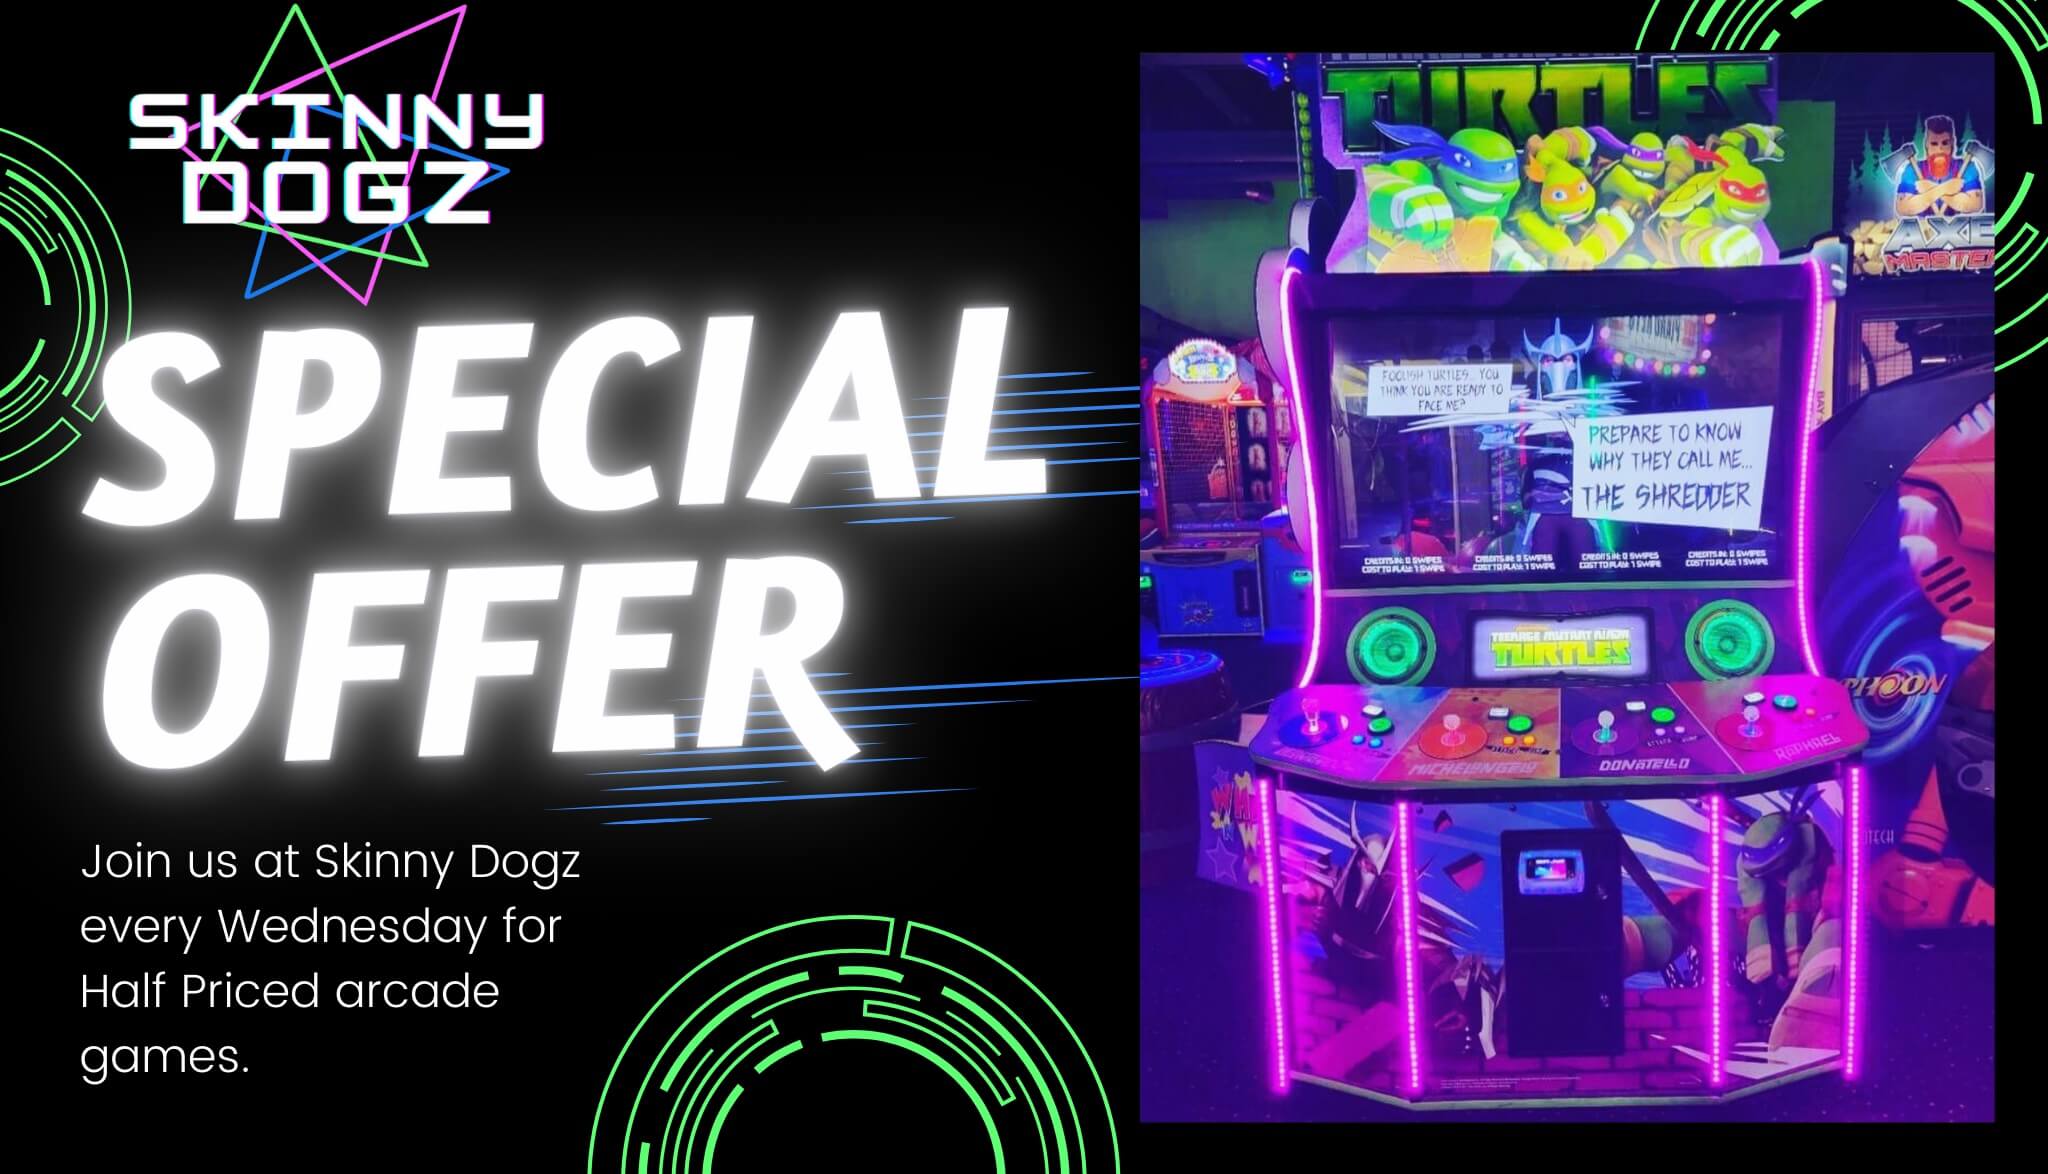  Image of a video game console with a prominent sign reading "Skinny Dogz Special Offer" for limited-time promotions.